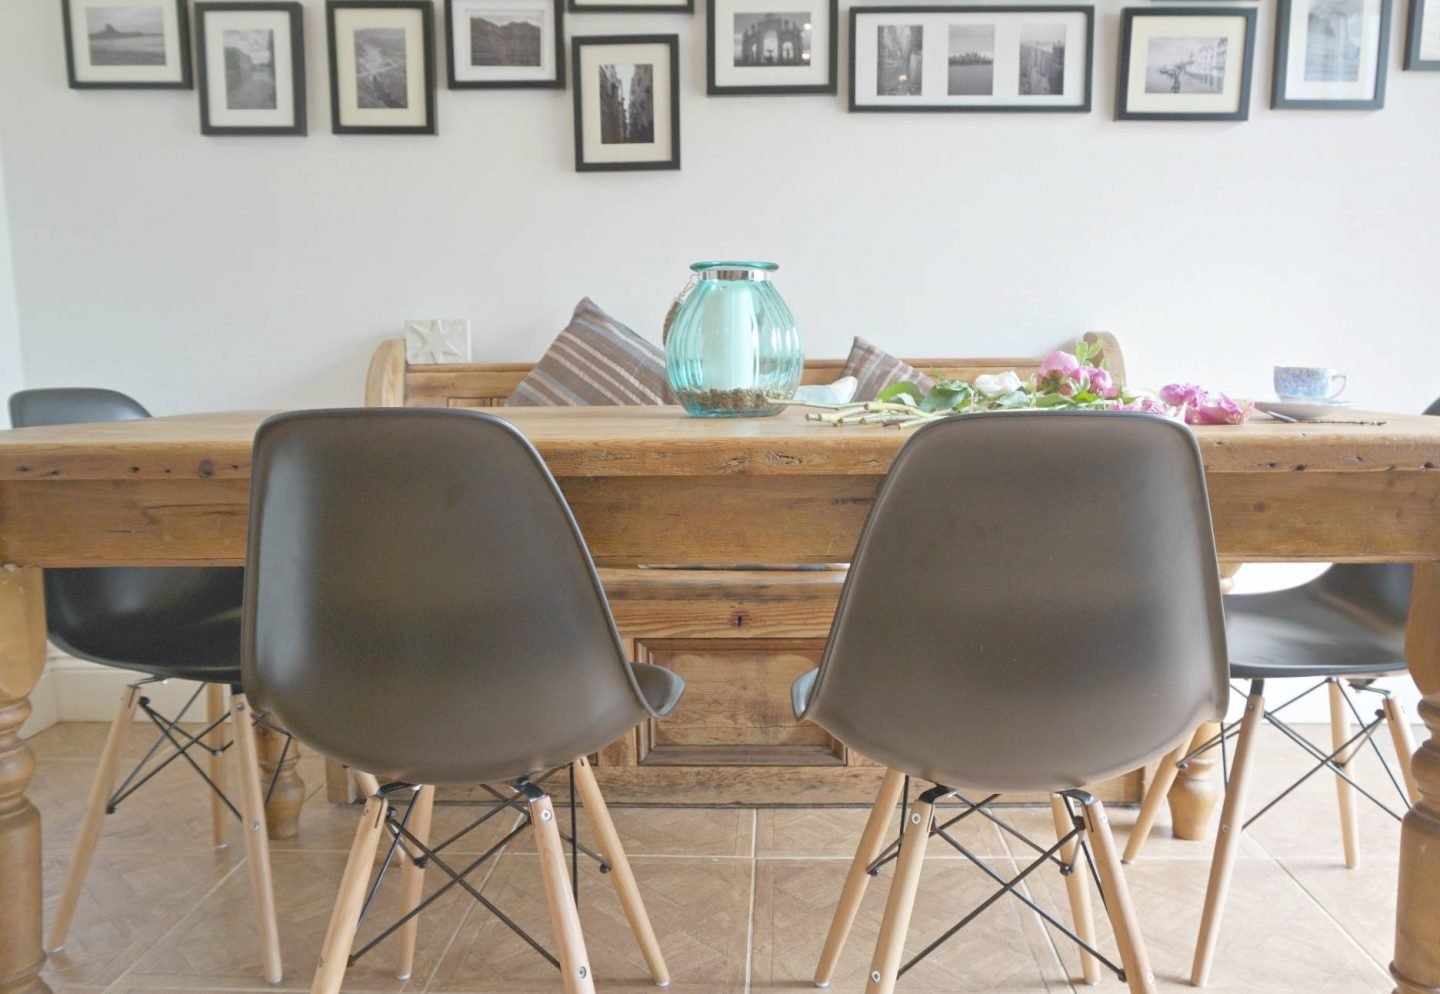 Creating A Vintage Yet Modern Dining Space